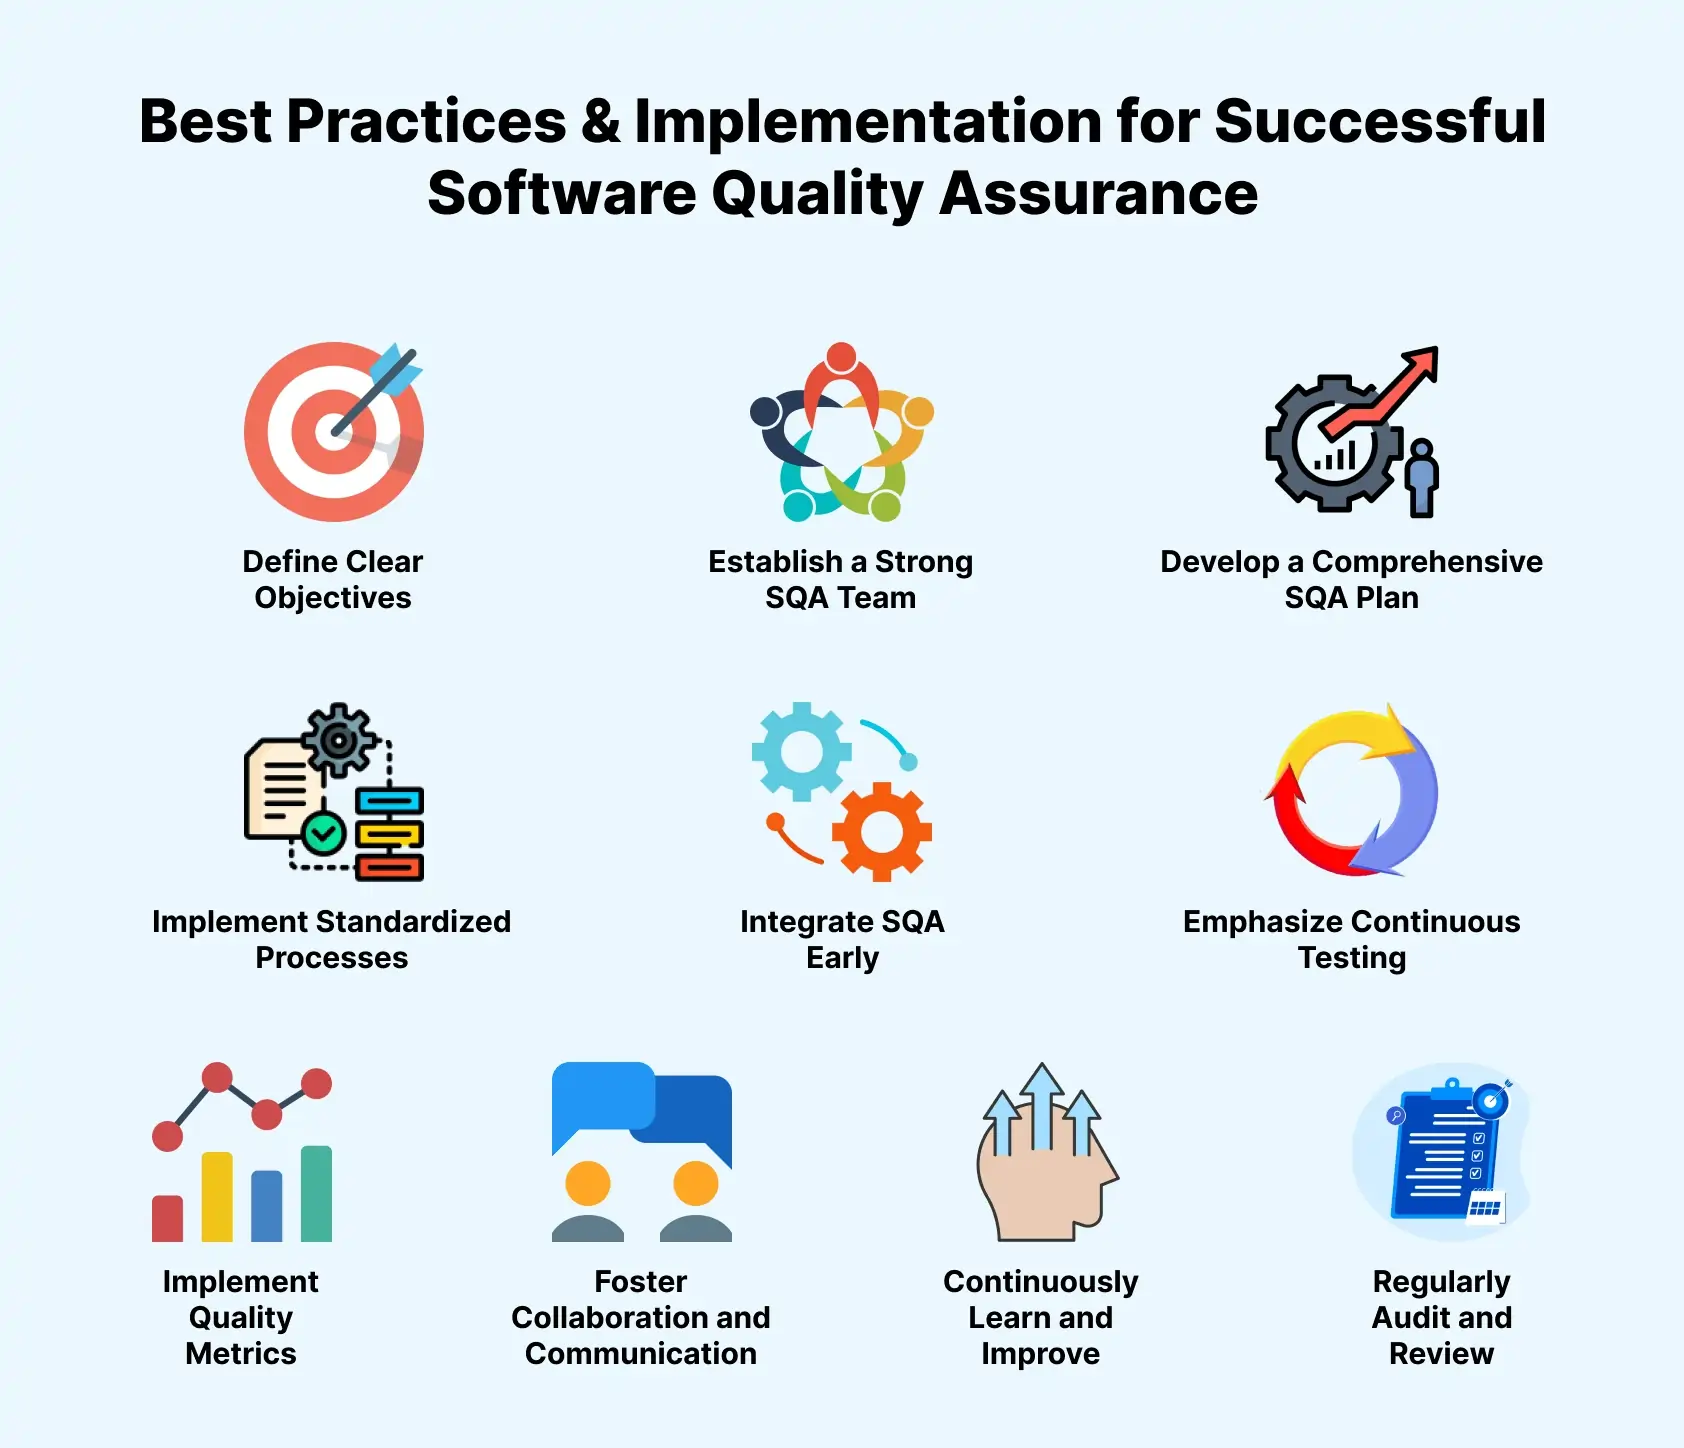 Best Practices & Implementation for Successful Software Quality